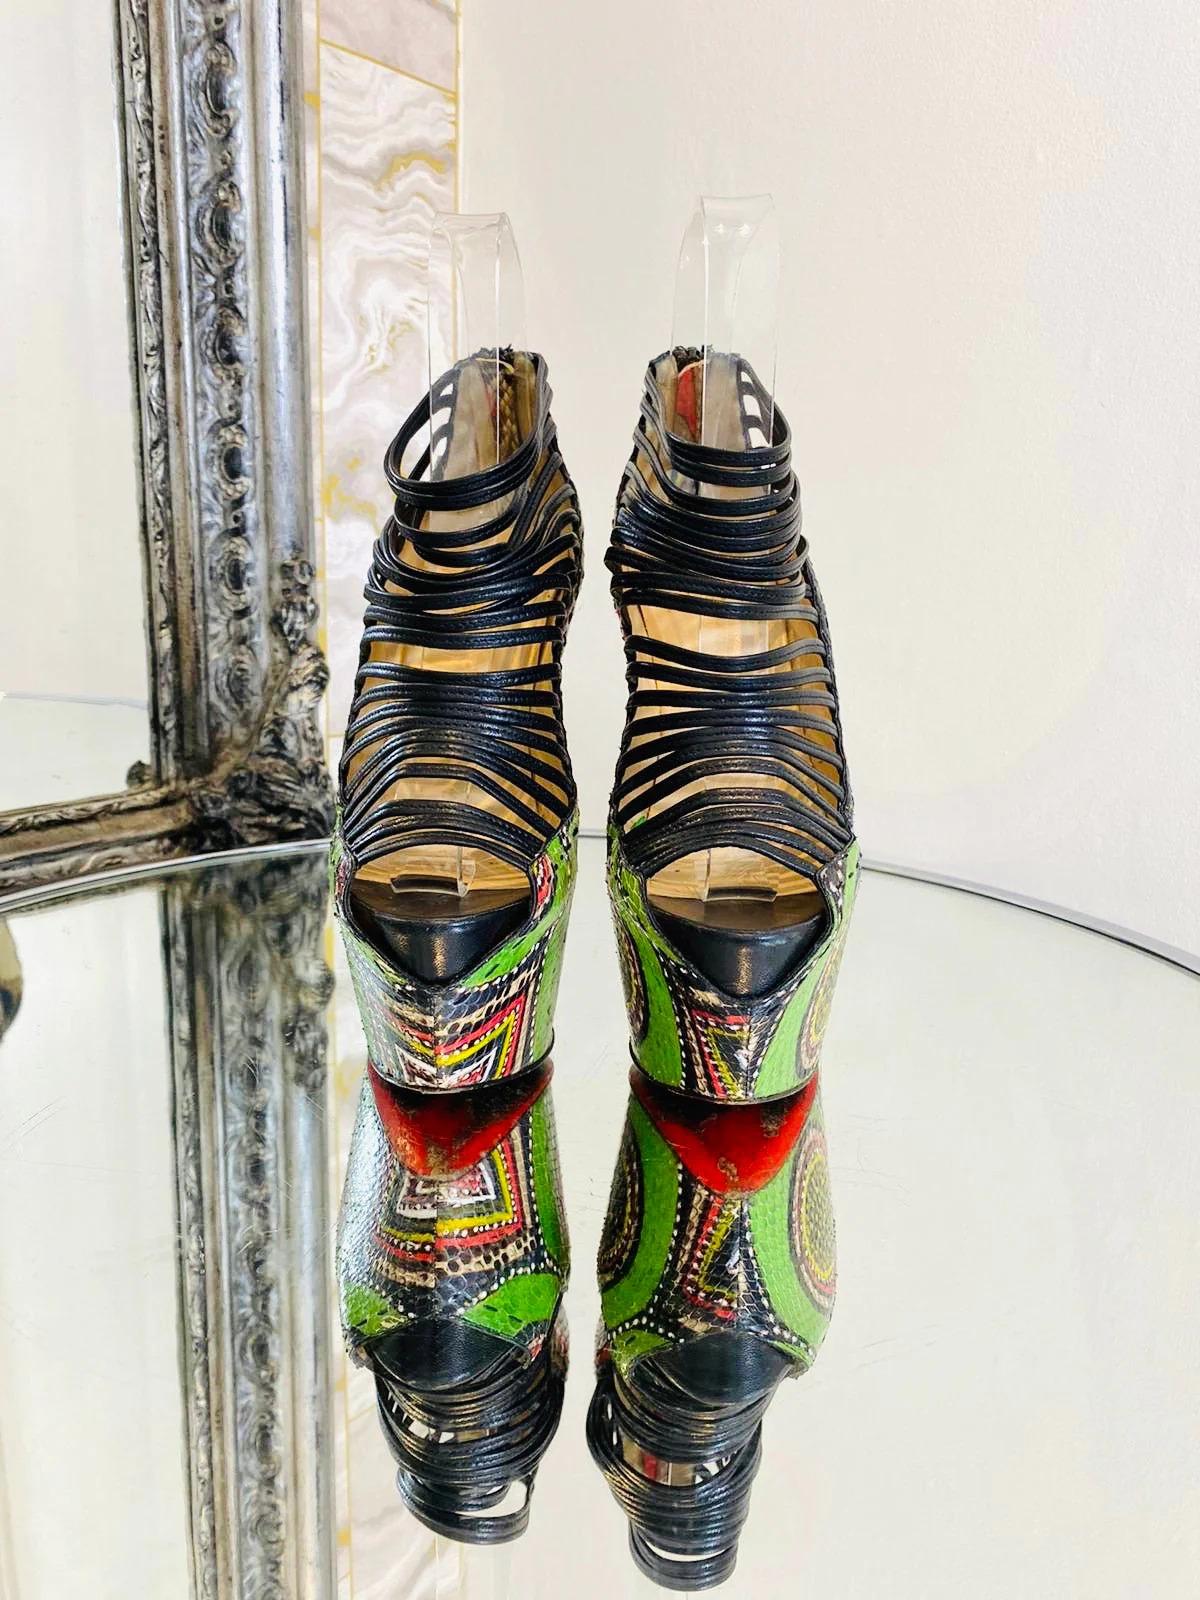 Christian Louboutin Zoulou Exotic Skin Platform Heels

Multicoloured Python skin platform with Pony skin heels and black leather strappy uppers.

Additional information:
Size – 37
Composition - Pony Skin, Python Skin, Leather
Condition – Very